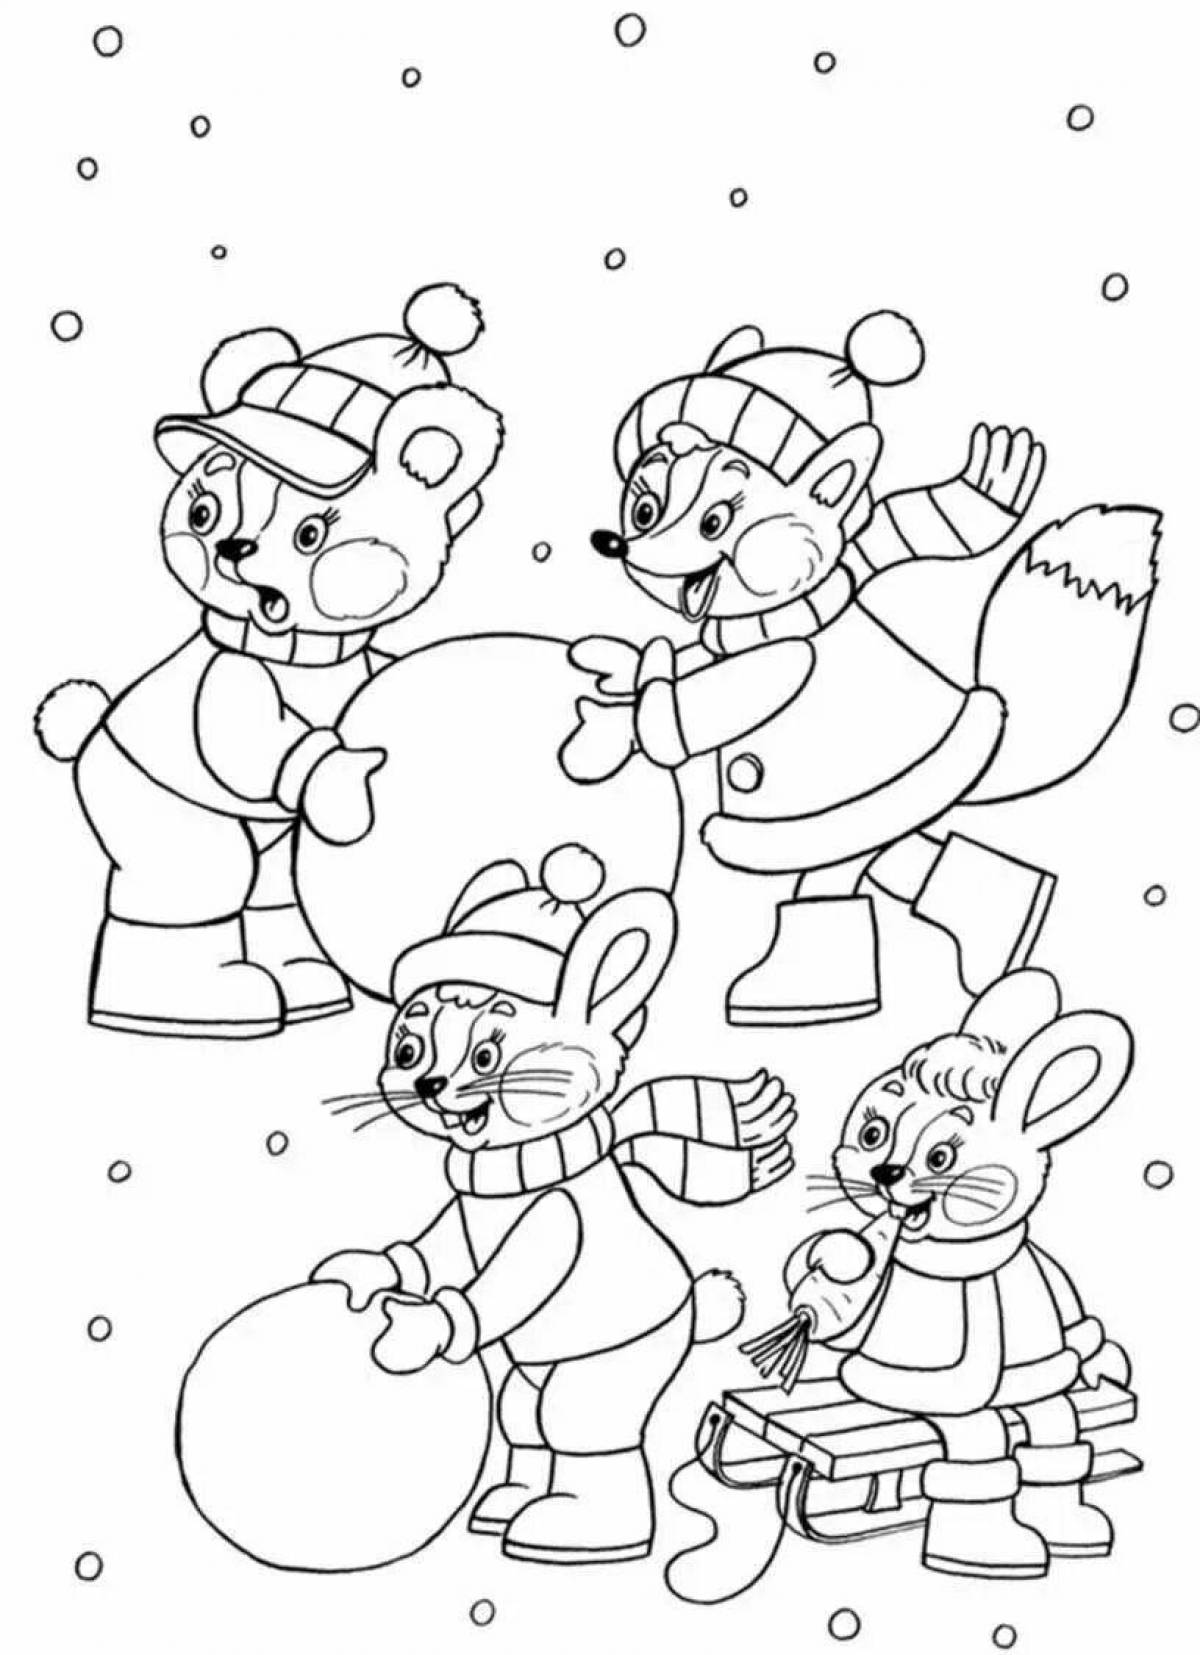 Delightful winter coloring book for kids